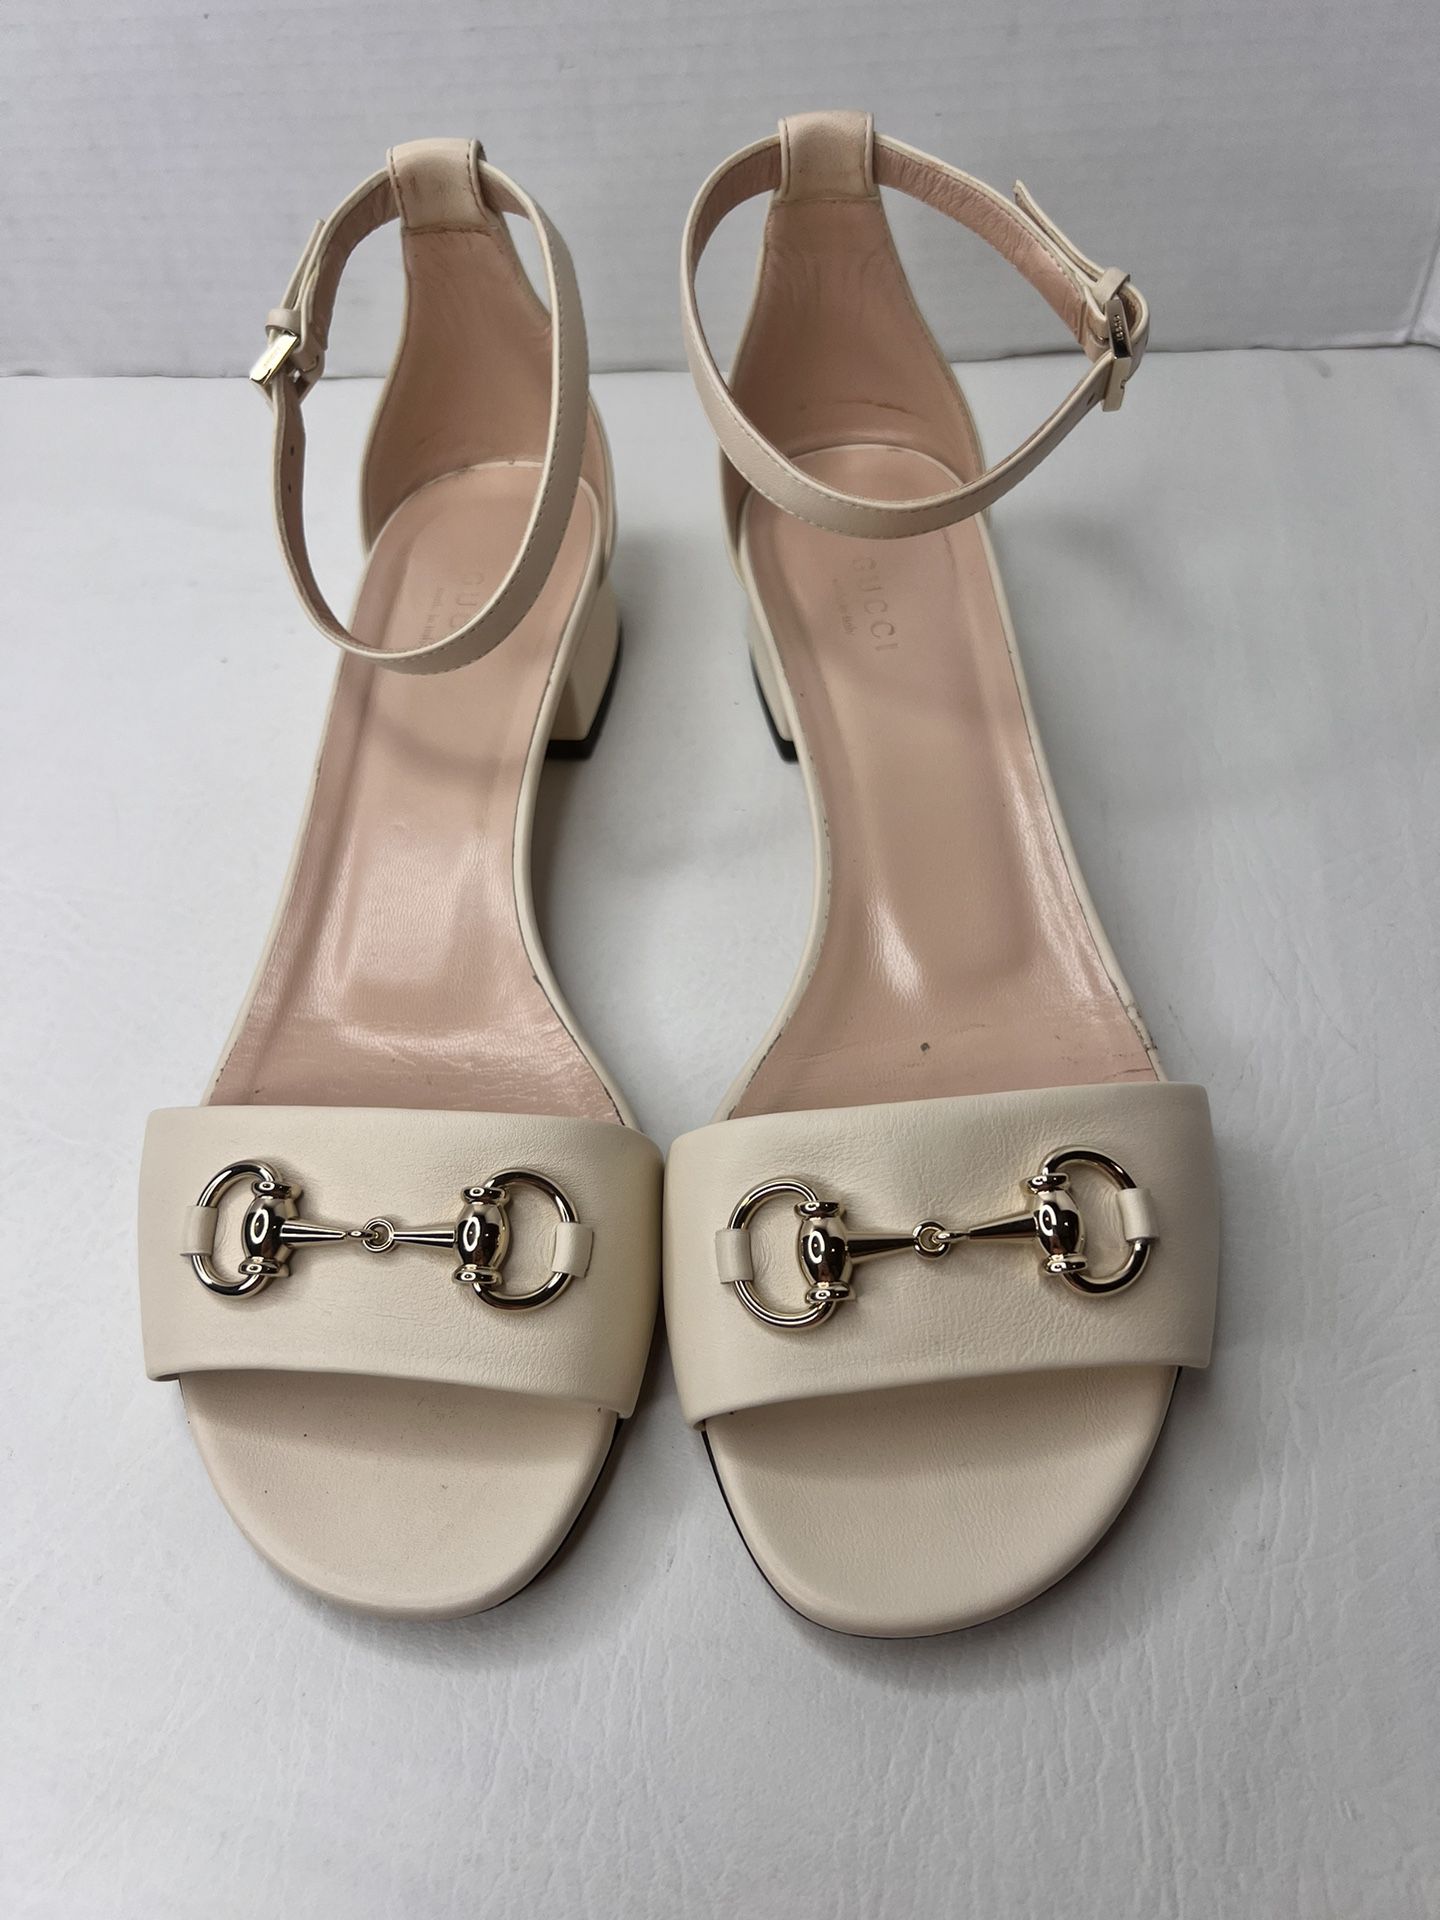 Gucci horsebit Beige Ivory Leather Flat Ankle Strap Sandals Size 40.5 / 10.5 